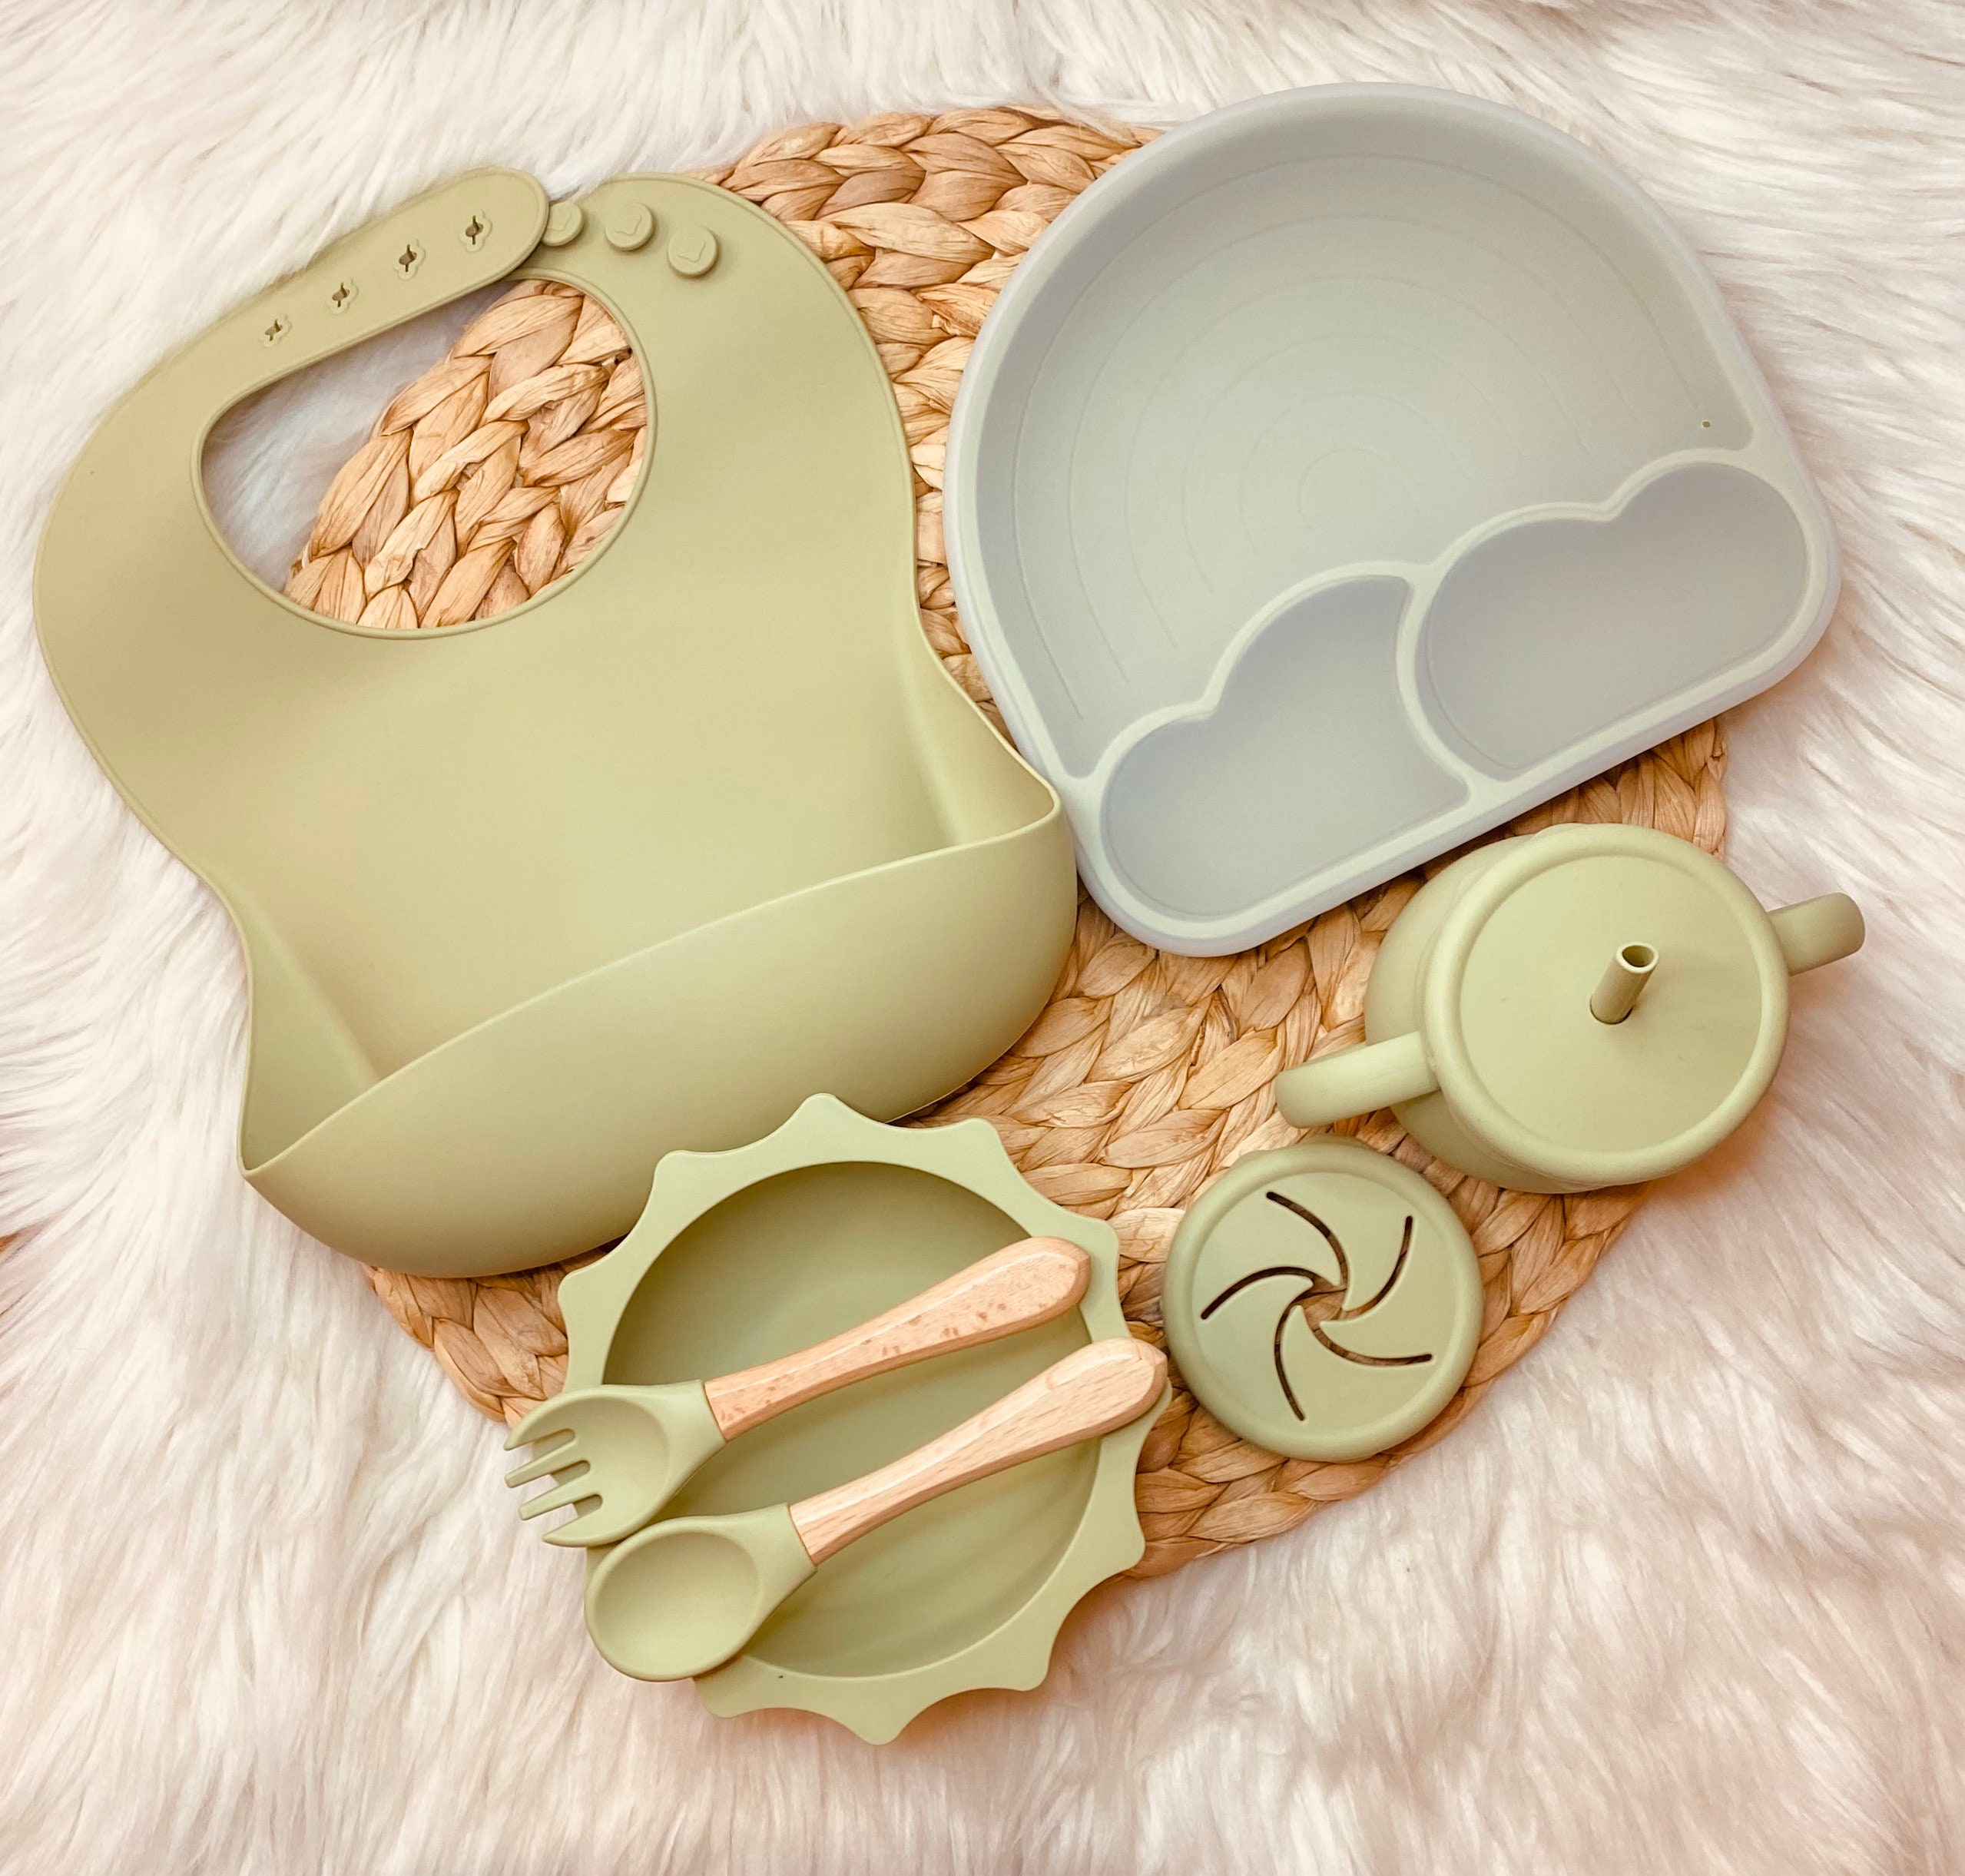 Baby Feeding Set Silicon Plate, Bowl, Bib, Sippy Cup, Fork, Spoon